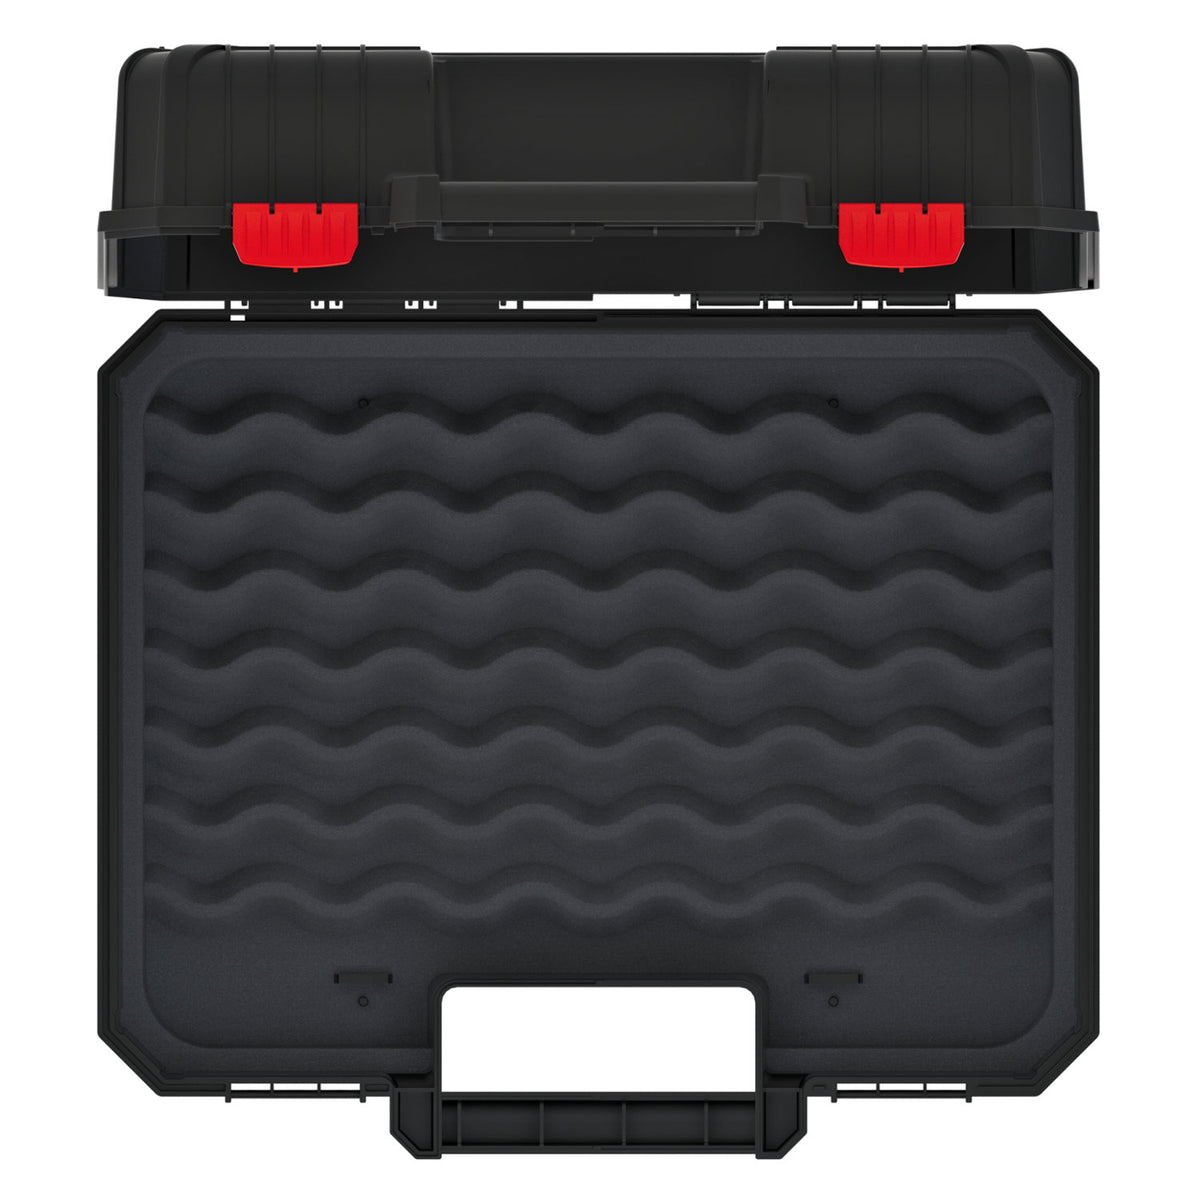  Heavy 40 KHV40P Tool Case Box Carrier with Foam Liner for P .